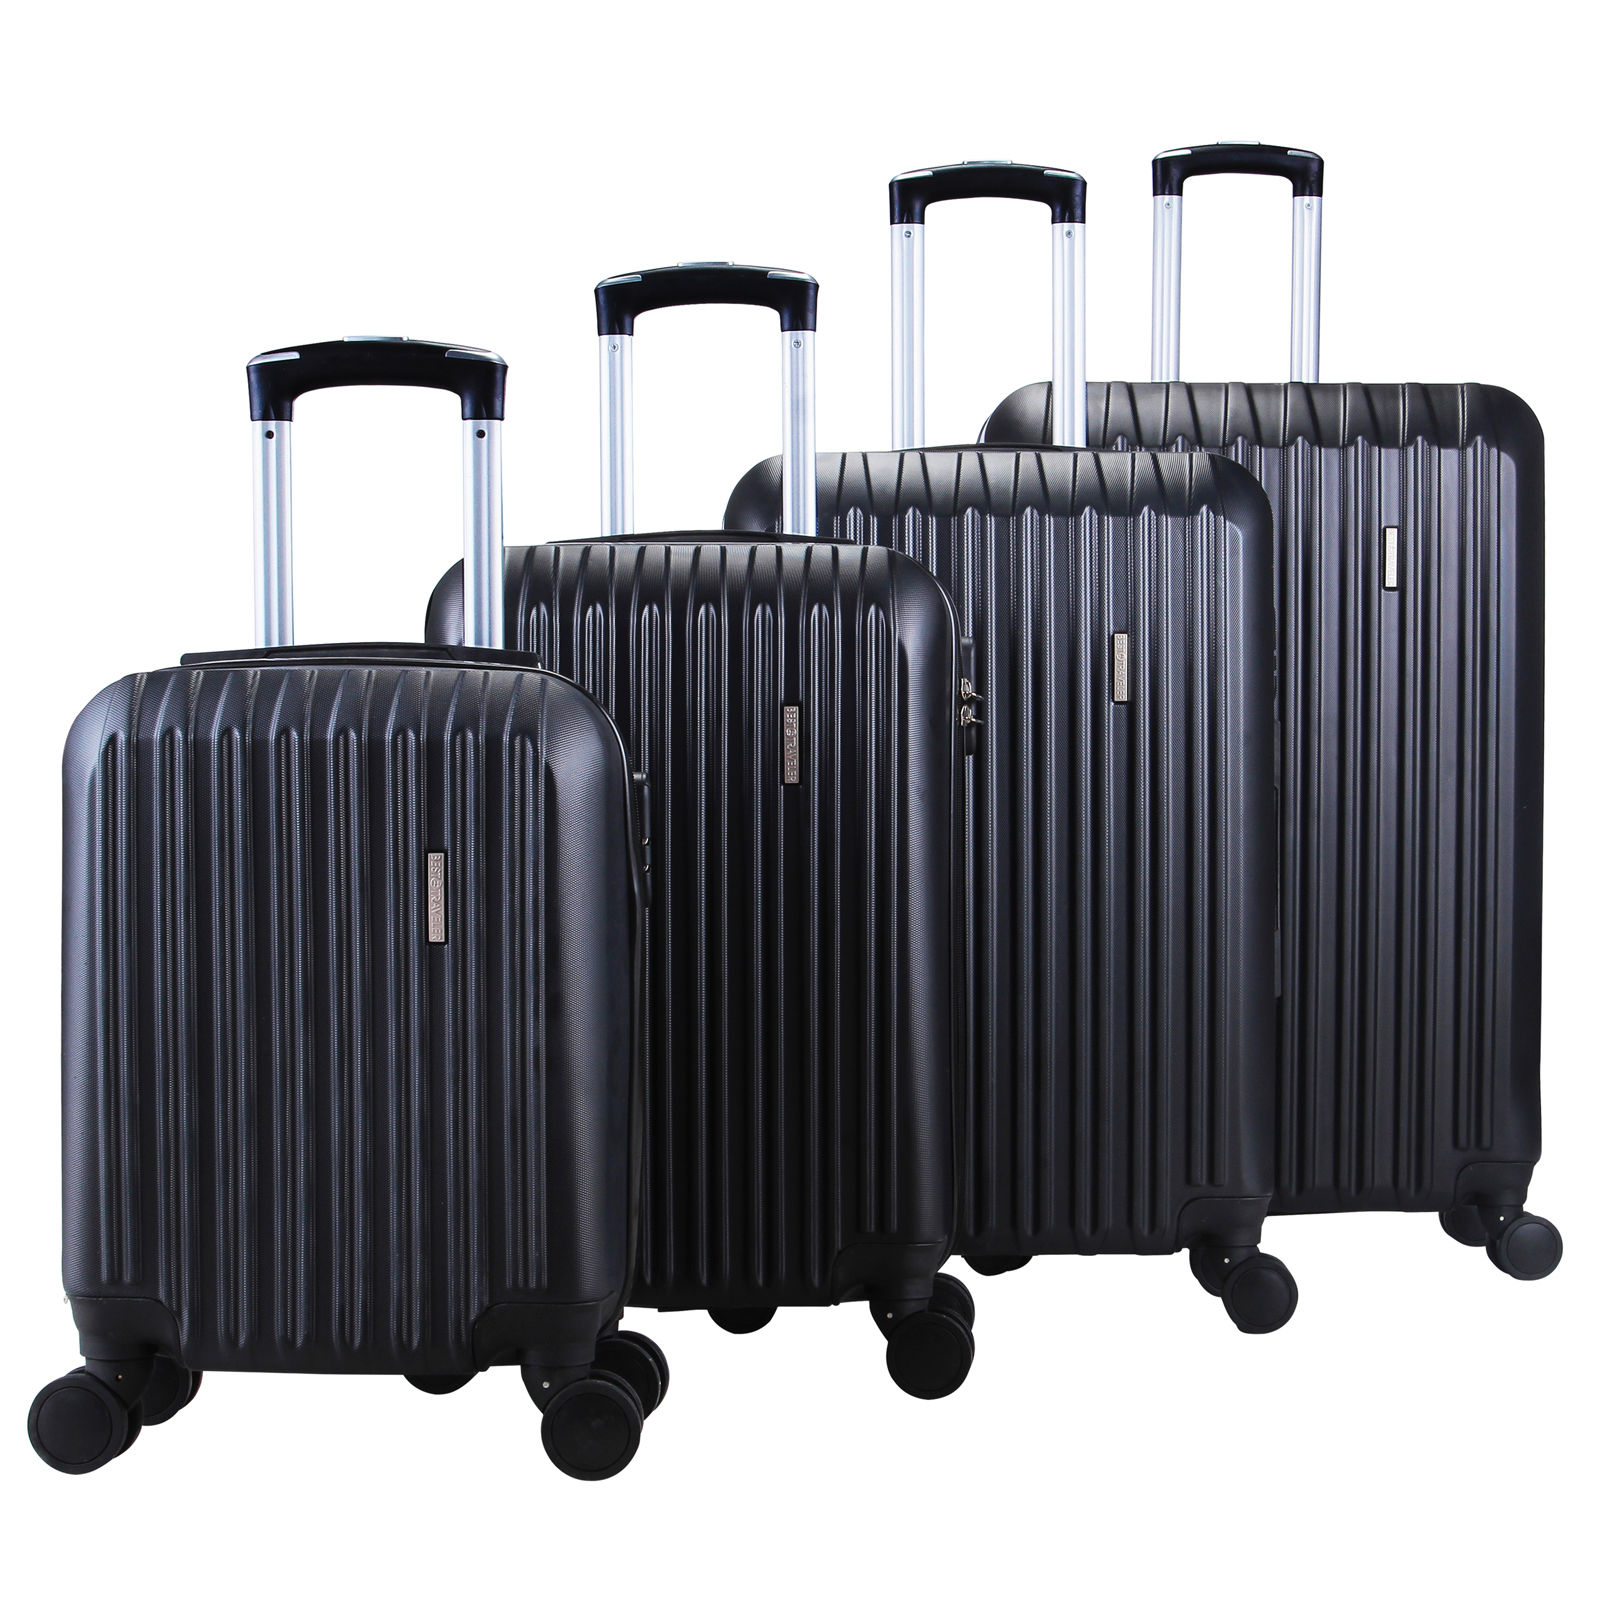 4-piece ABS spinner hardshell luggage set for $90